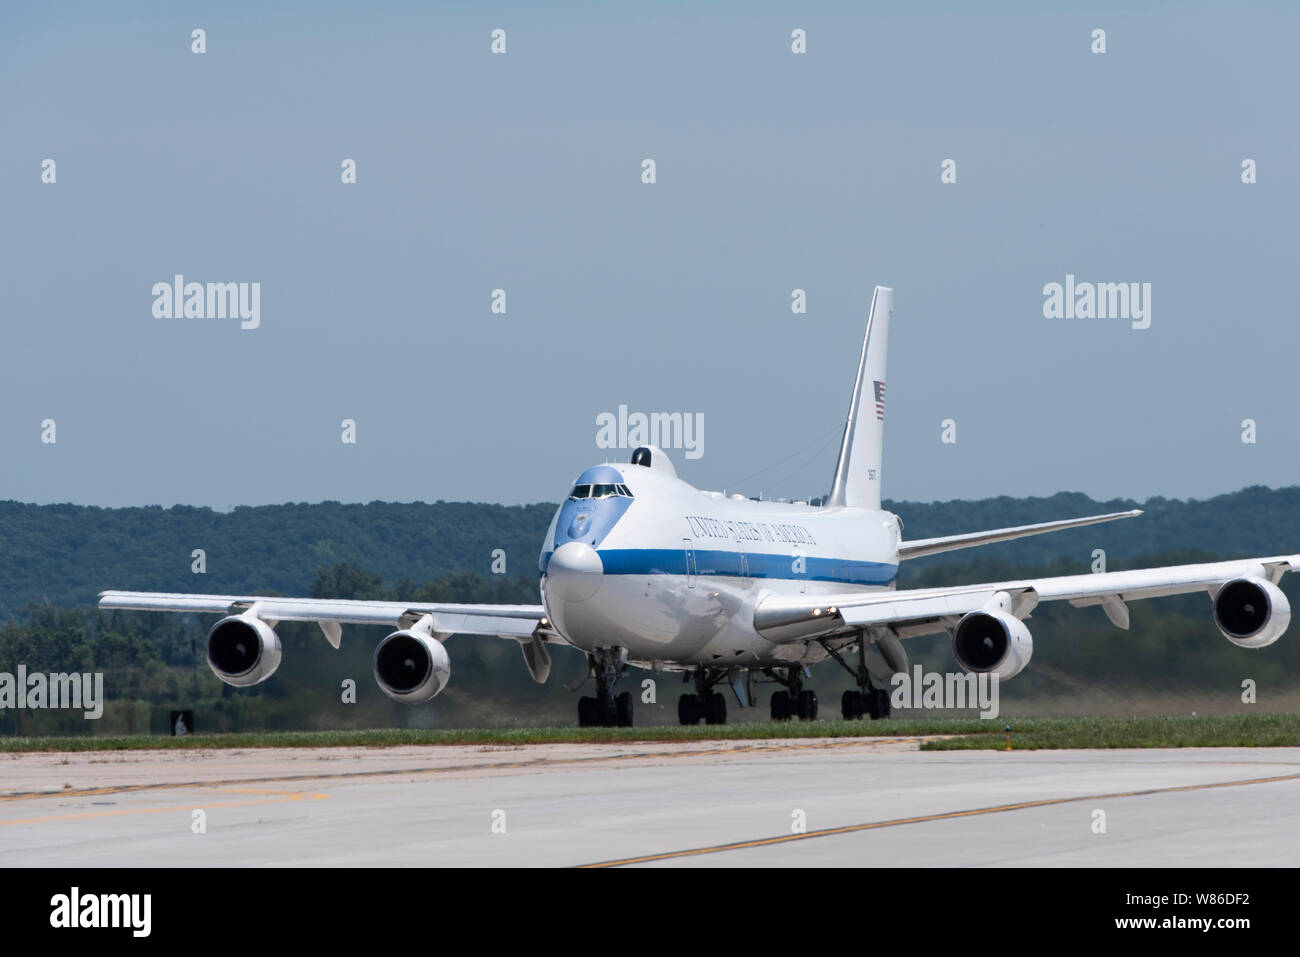 A U.S. Air Force E-4B National Airborne Operations Center aircraft takes off from Offutt Air Force Base, Nebraska, July 10, 2019. The E-4B provides travel support for the Secretary of Defense and their staff to ensure command and control connectivity outside of the continental United States. (U.S. Air Force photo by Staff Sgt. Jacob Skovo) Stock Photo